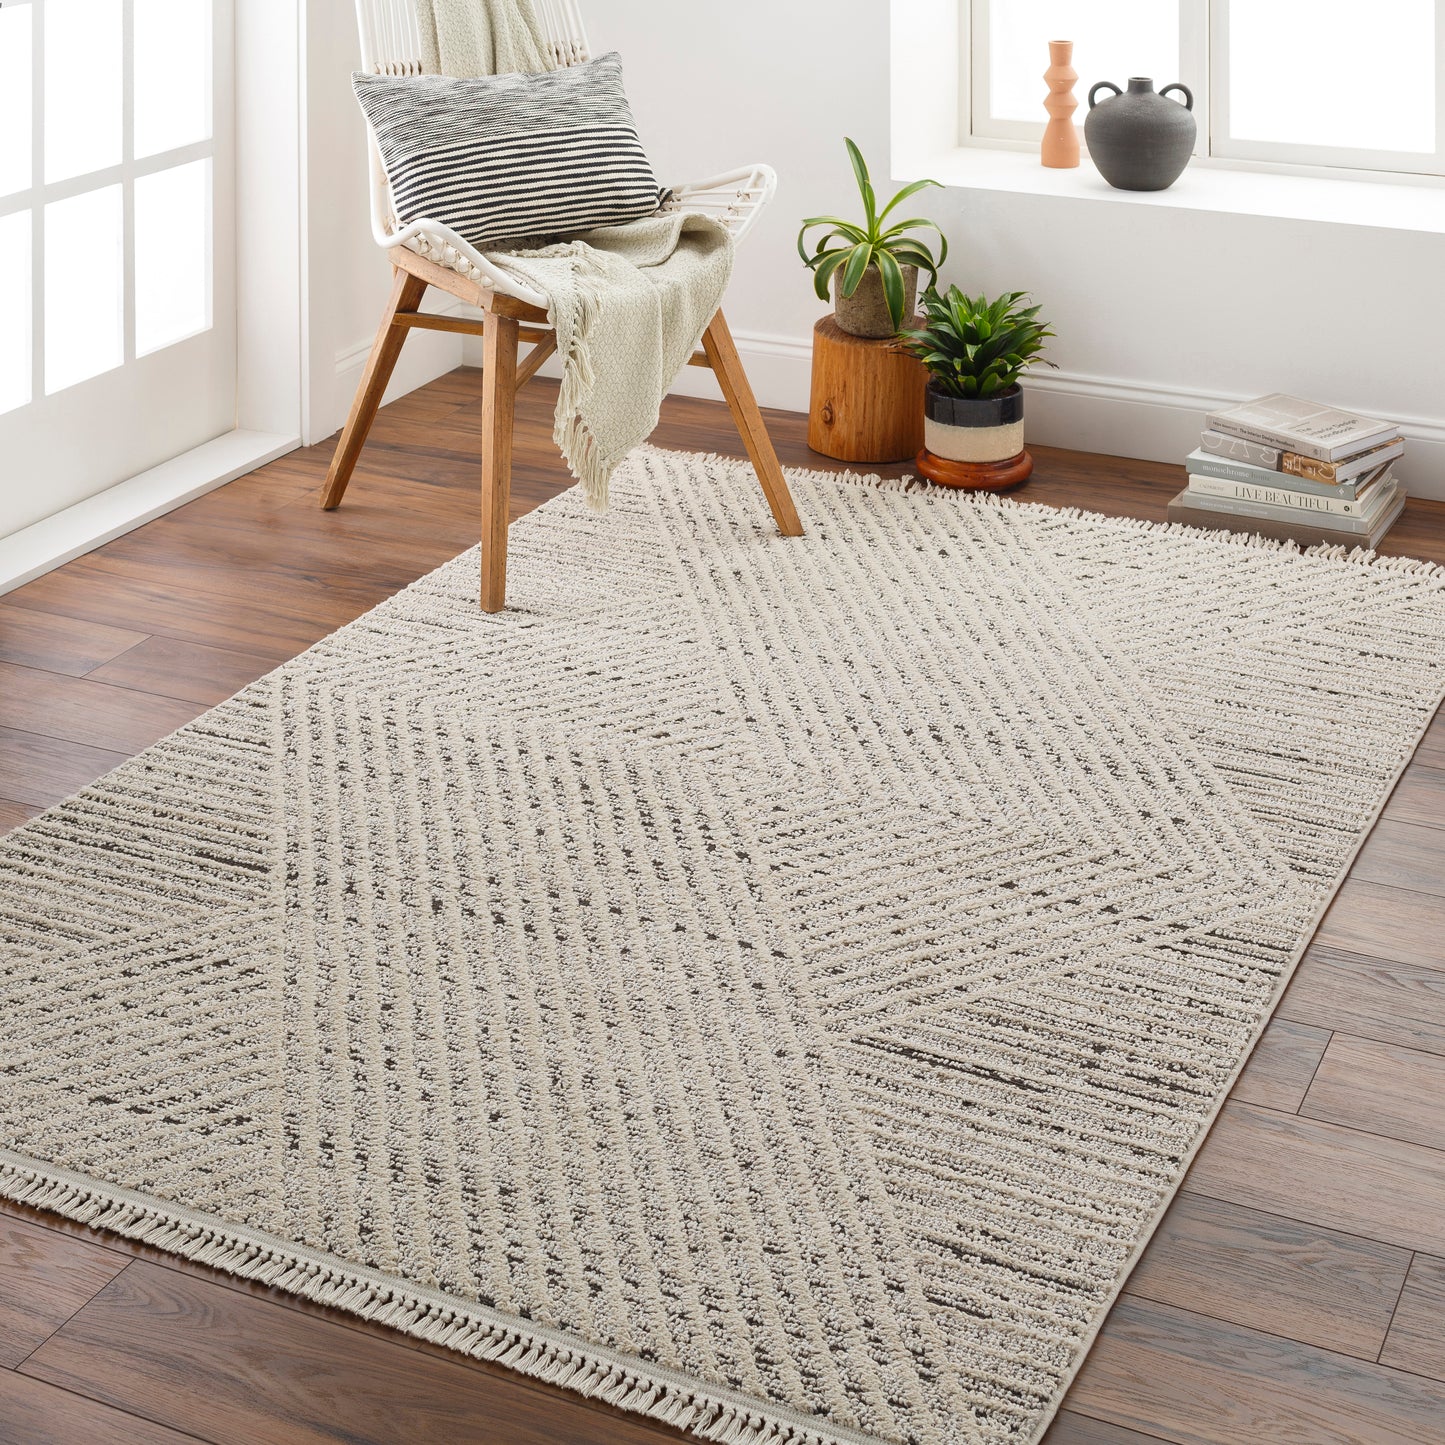 Berlin 31727 Machine Woven Synthetic Blend Indoor Area Rug by Surya Rugs